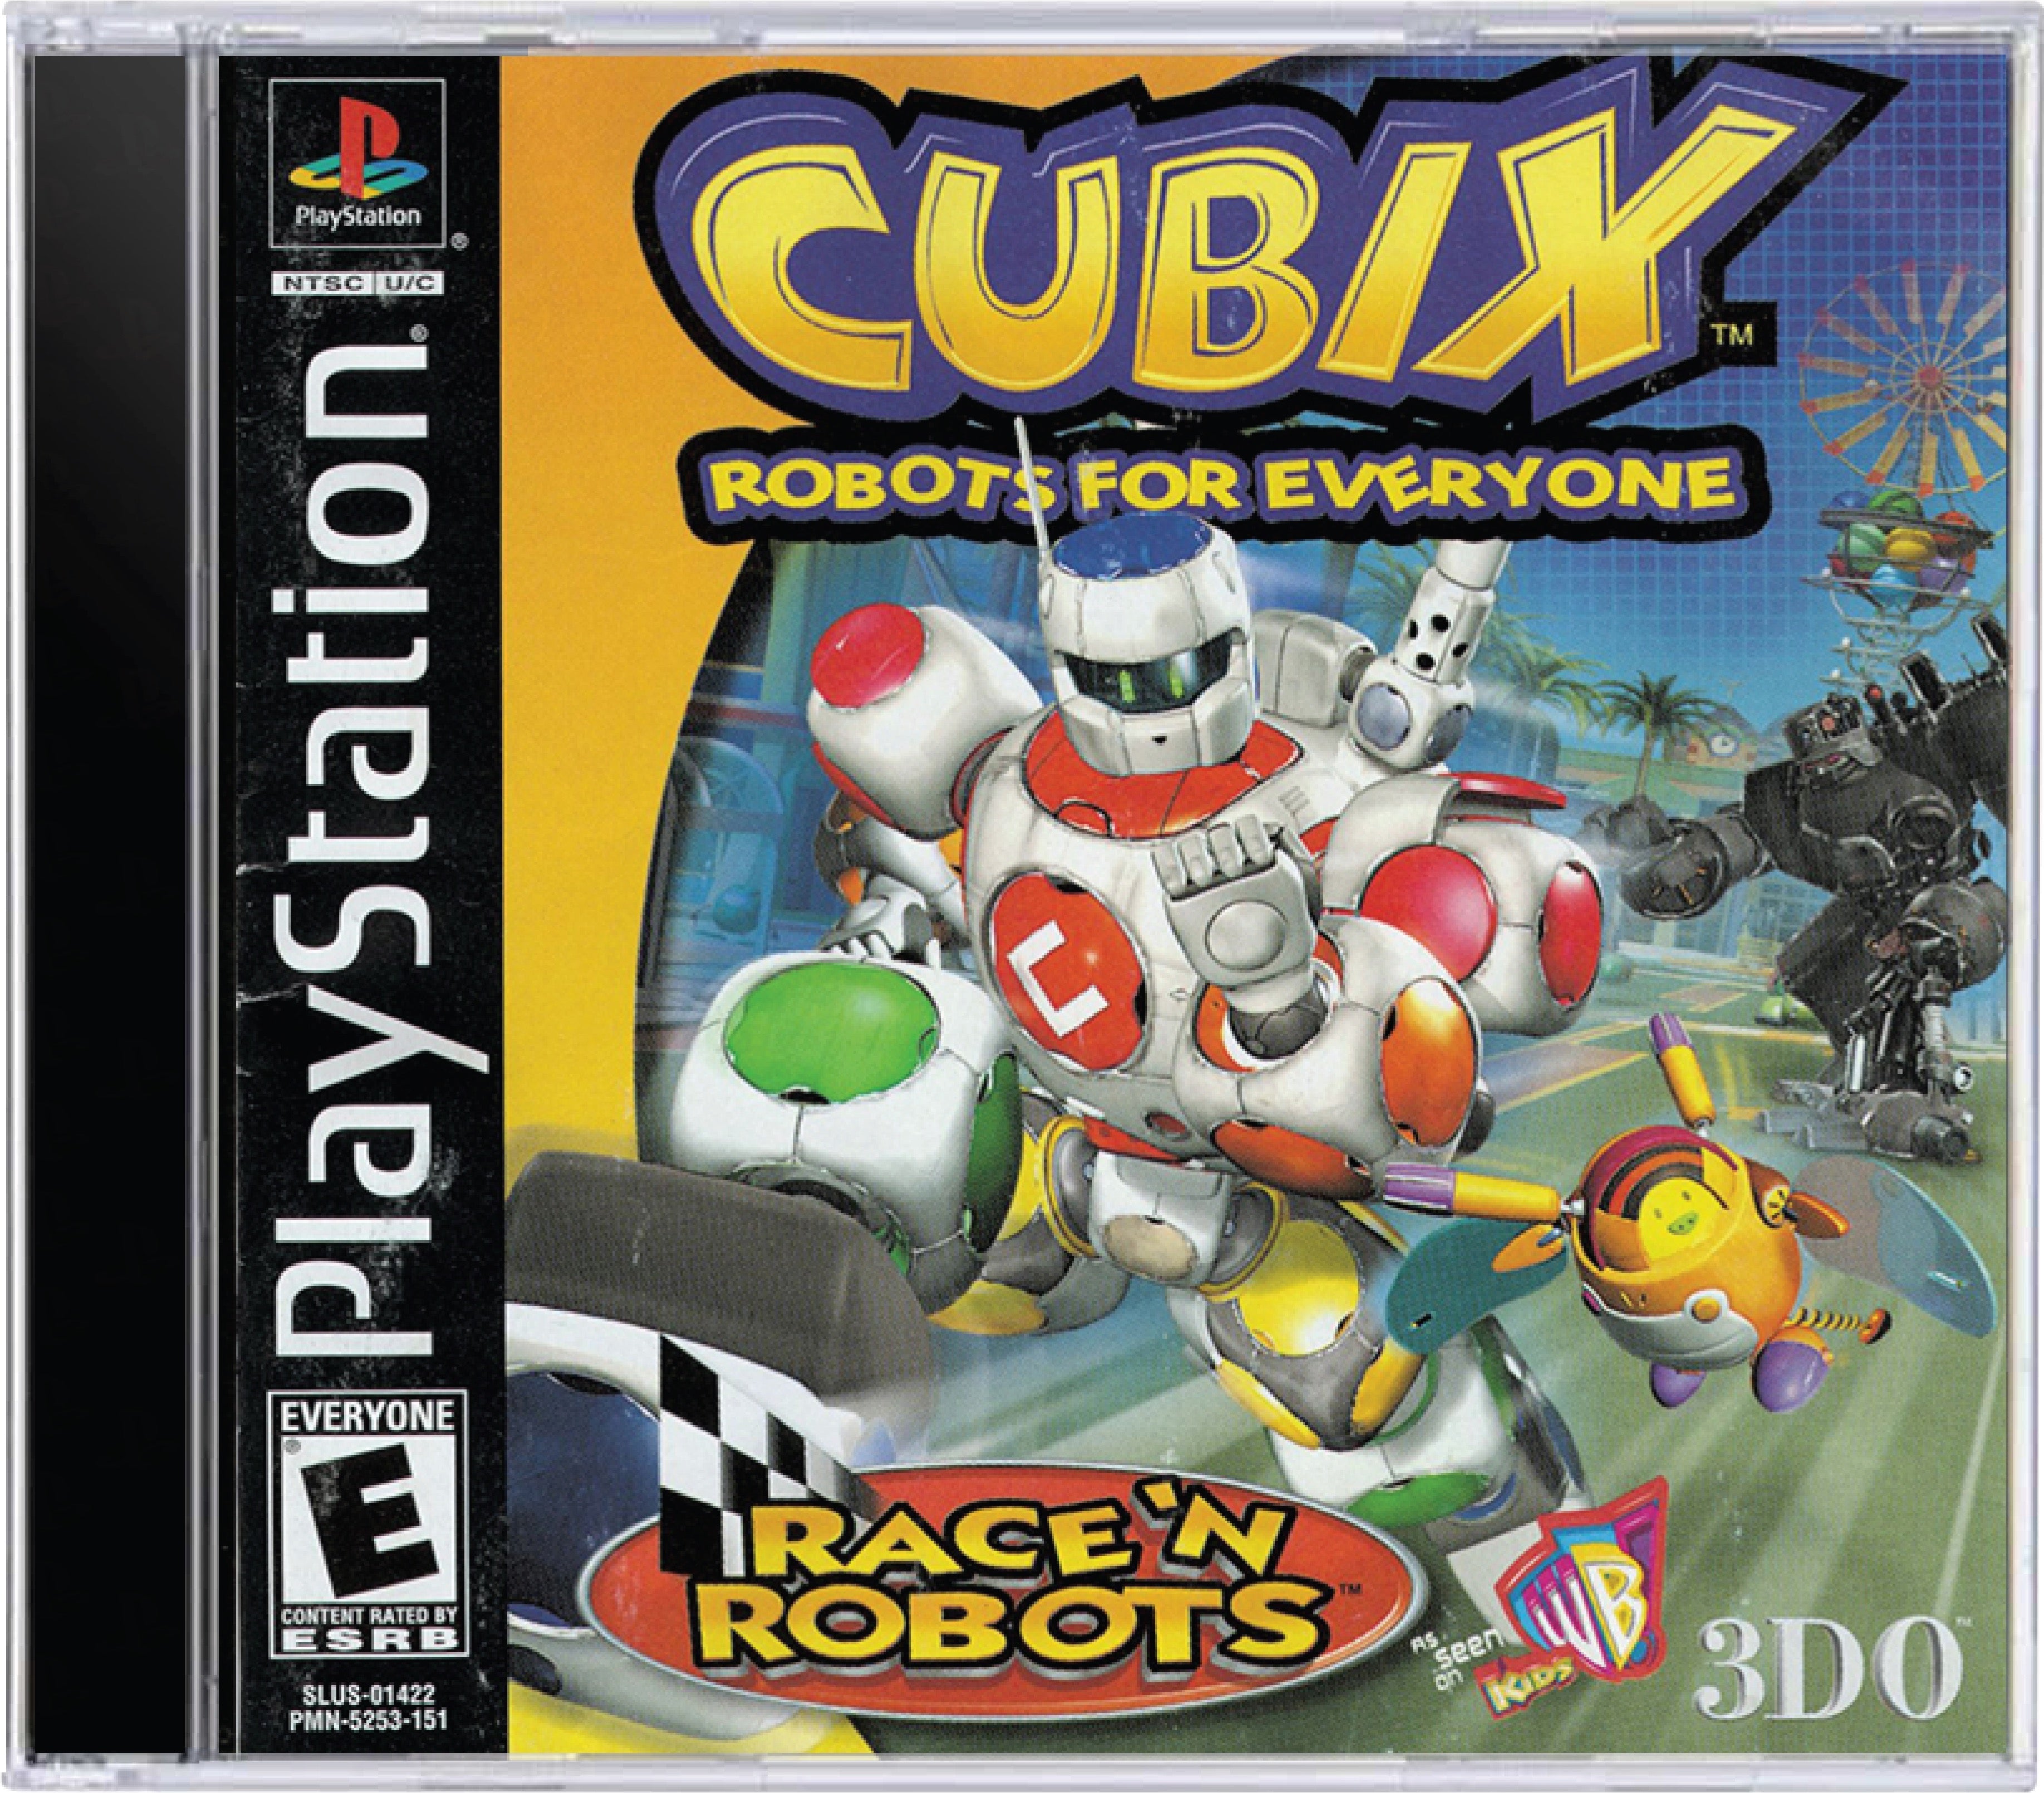 Cubix Robots for Everyone Race N Robots Cover Art and Product Photo